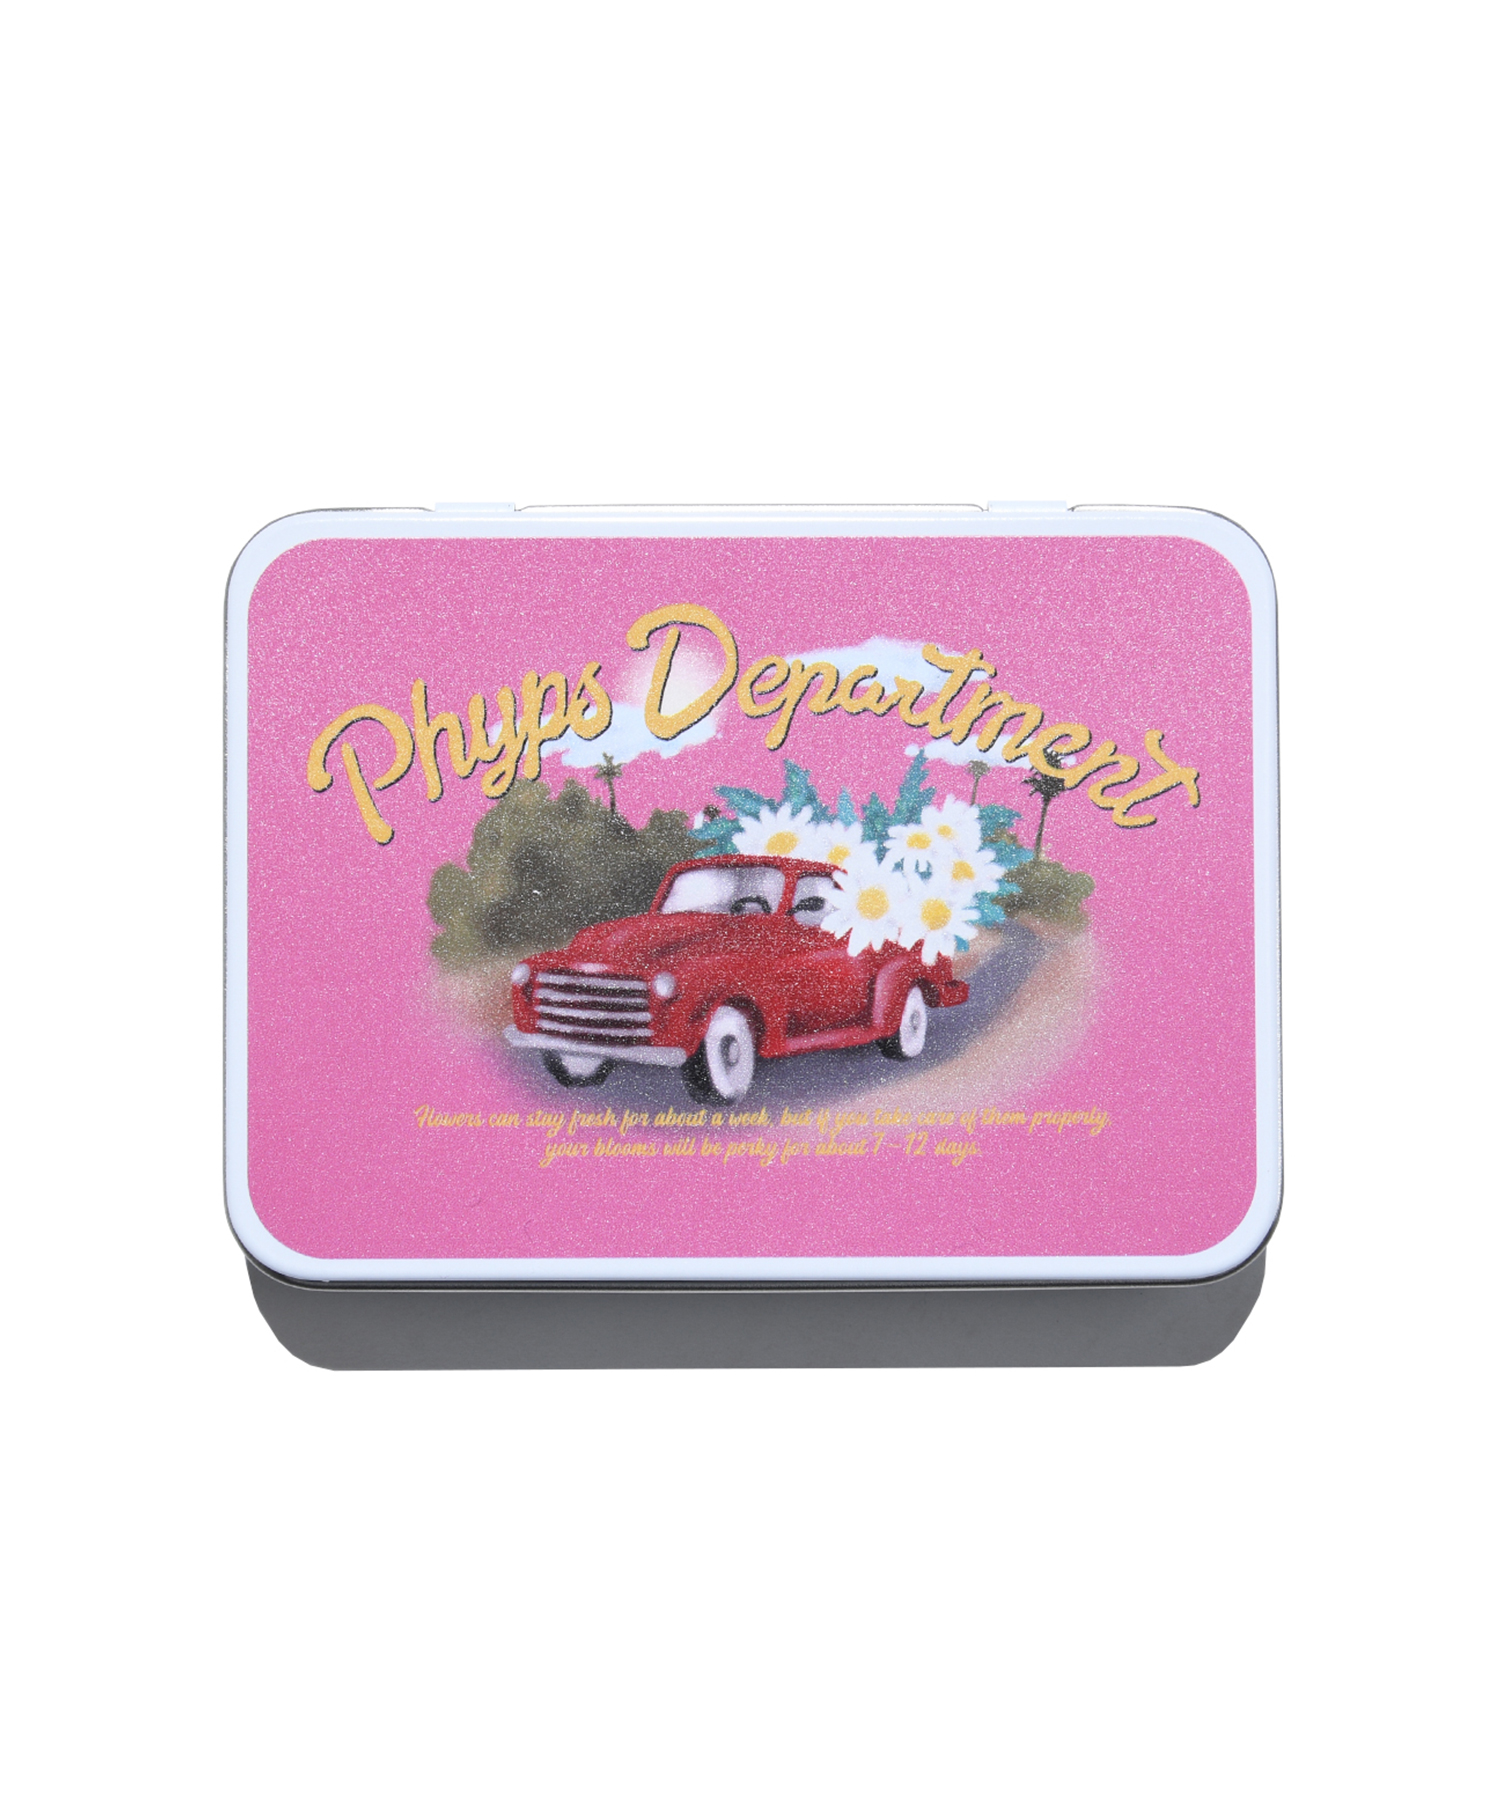 FLOWER DELIVERY TIN CASE PINK